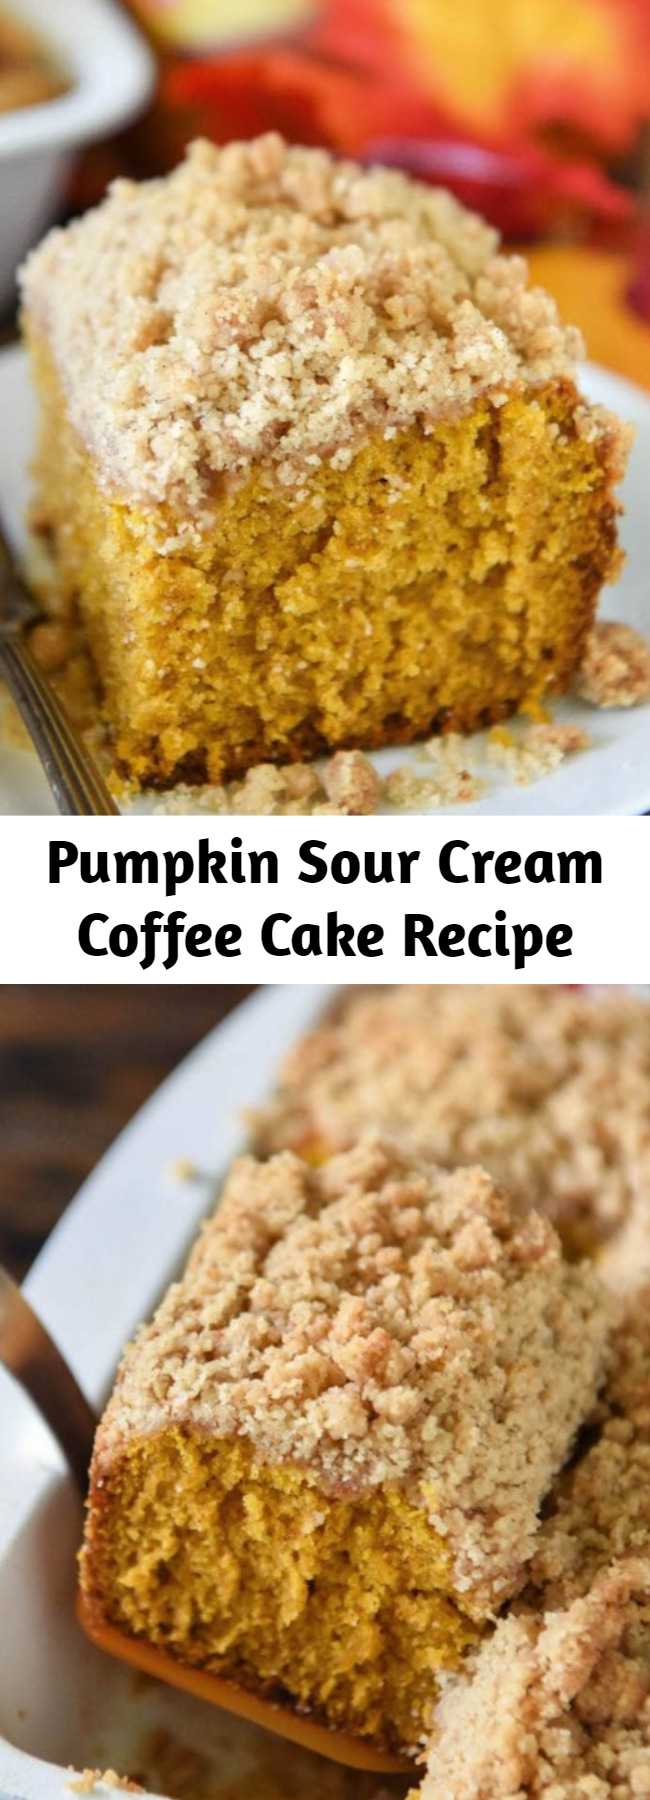 Pumpkin Sour Cream Coffee Cake Recipe - An extra moist pumpkin spice cake (made from scratch) is topped with an amazing cinnamon crumb topping! Serve it with coffee for breakfast or for dessert! #Pumpkin #CoffeeCake #Dessert #Cake